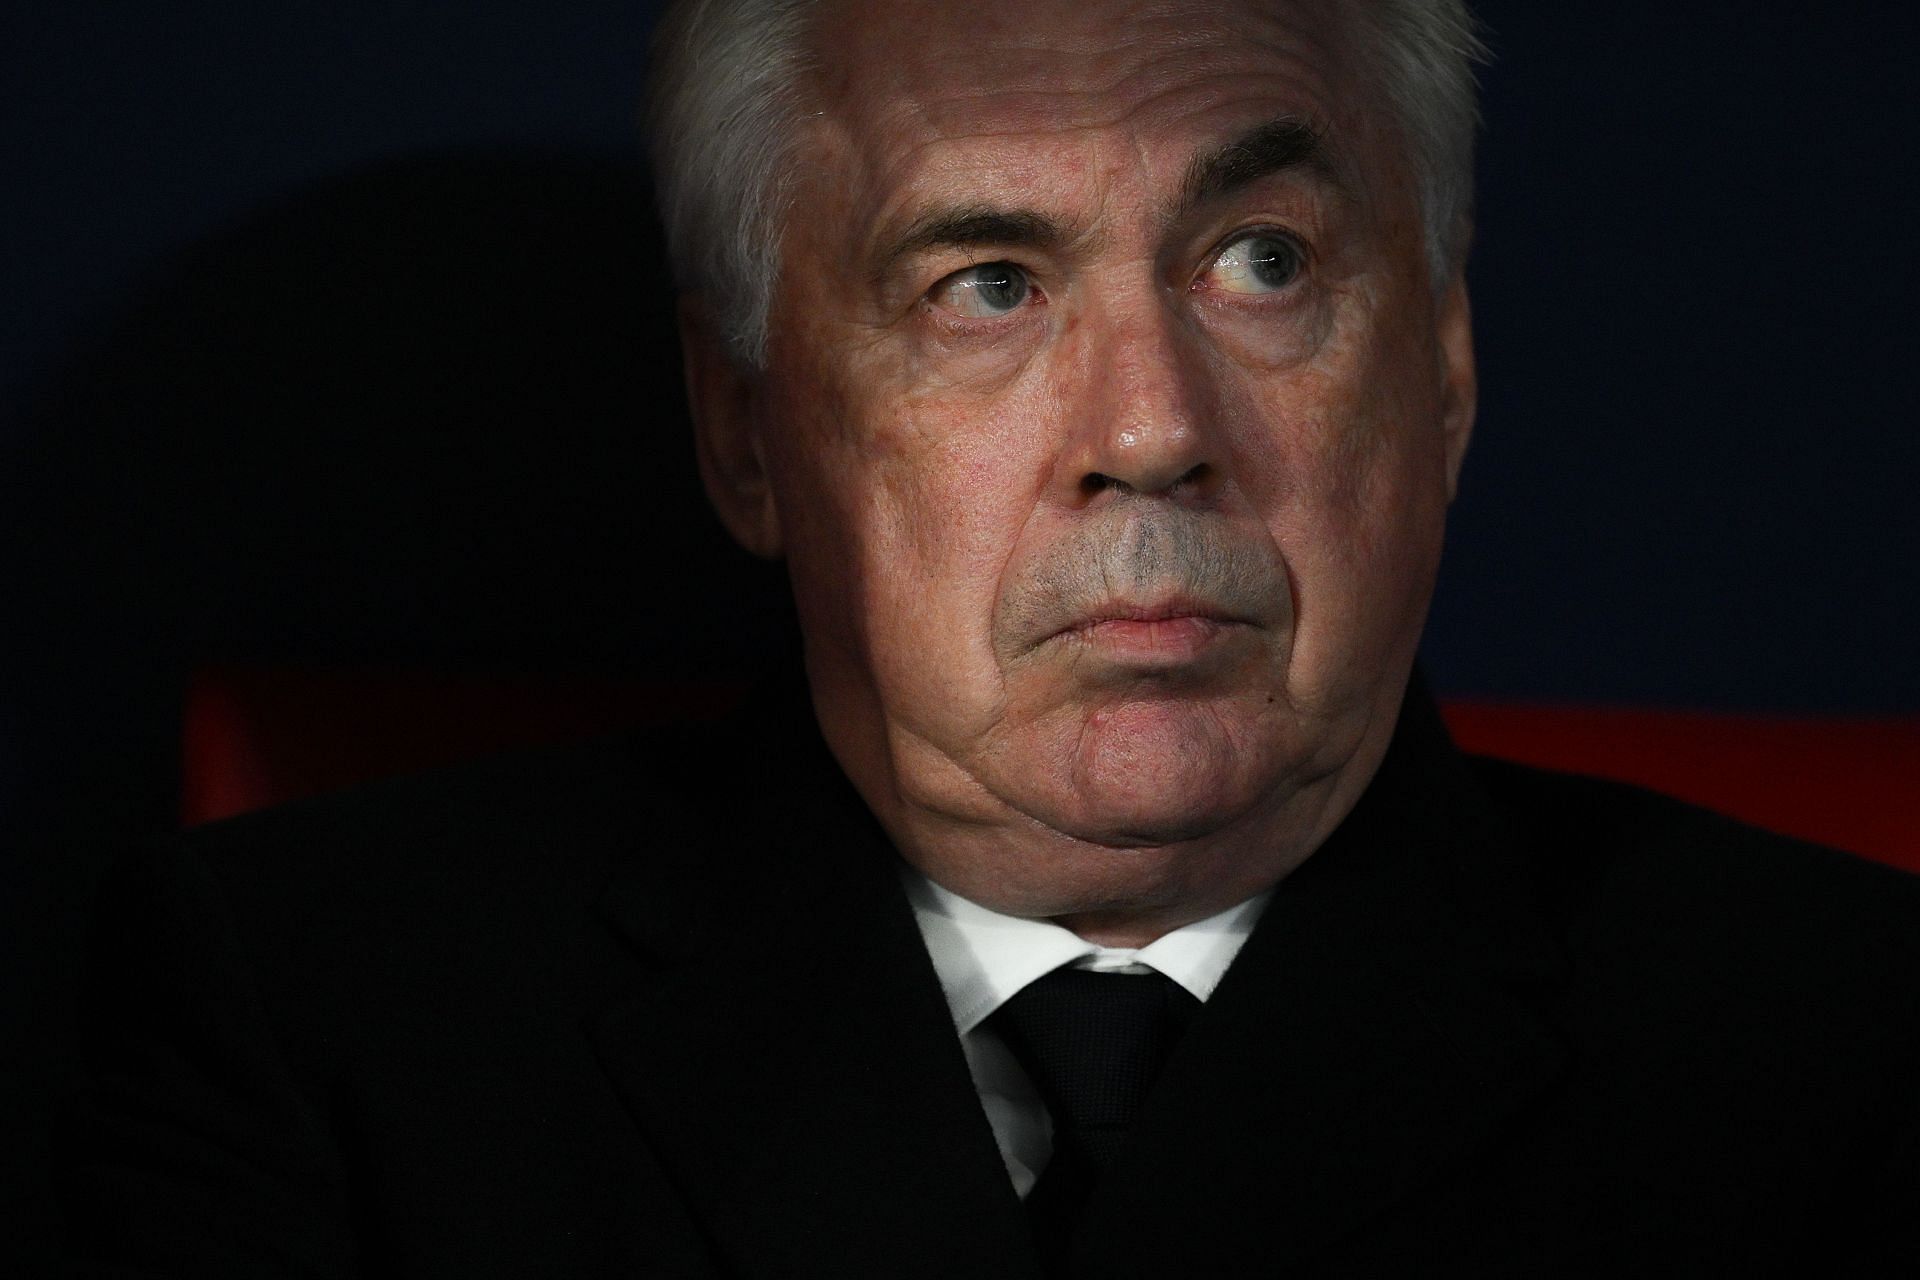 Carlo Ancelotti insisted that all decisions were correct.